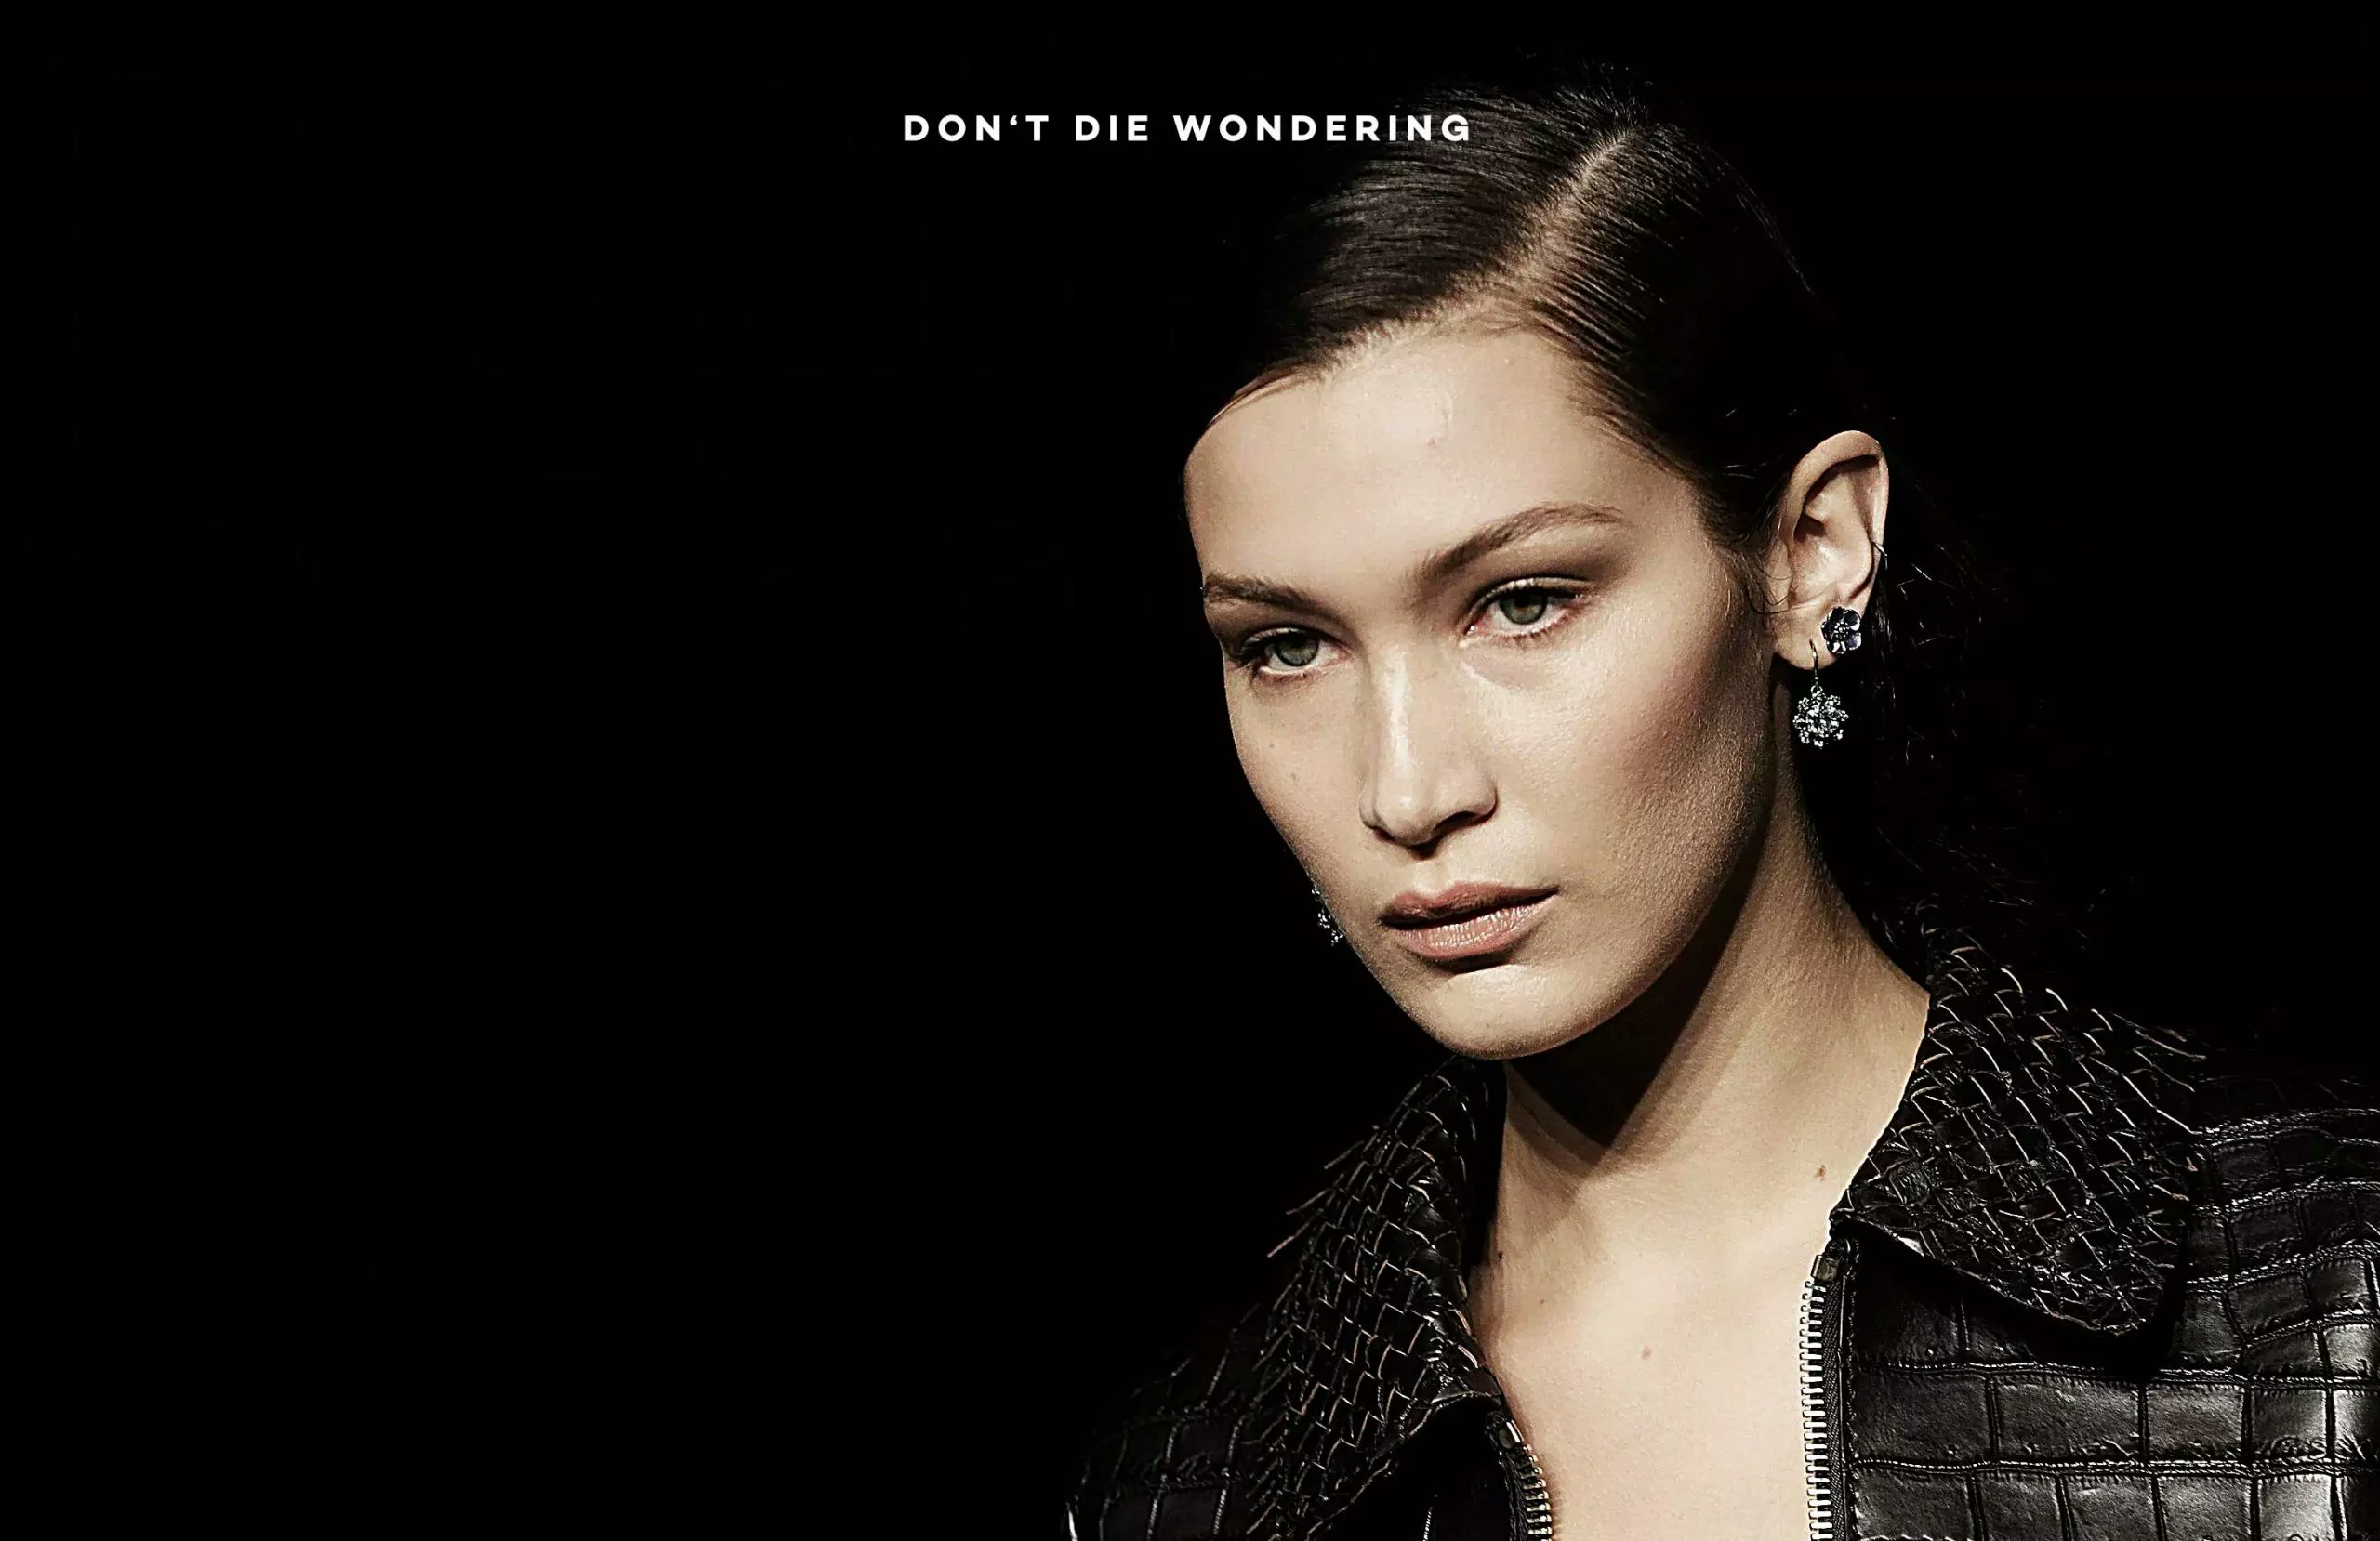 Bella Hadid: “I Have A Responsibility To Speak Up For The People Who Aren’t Being Heard.”